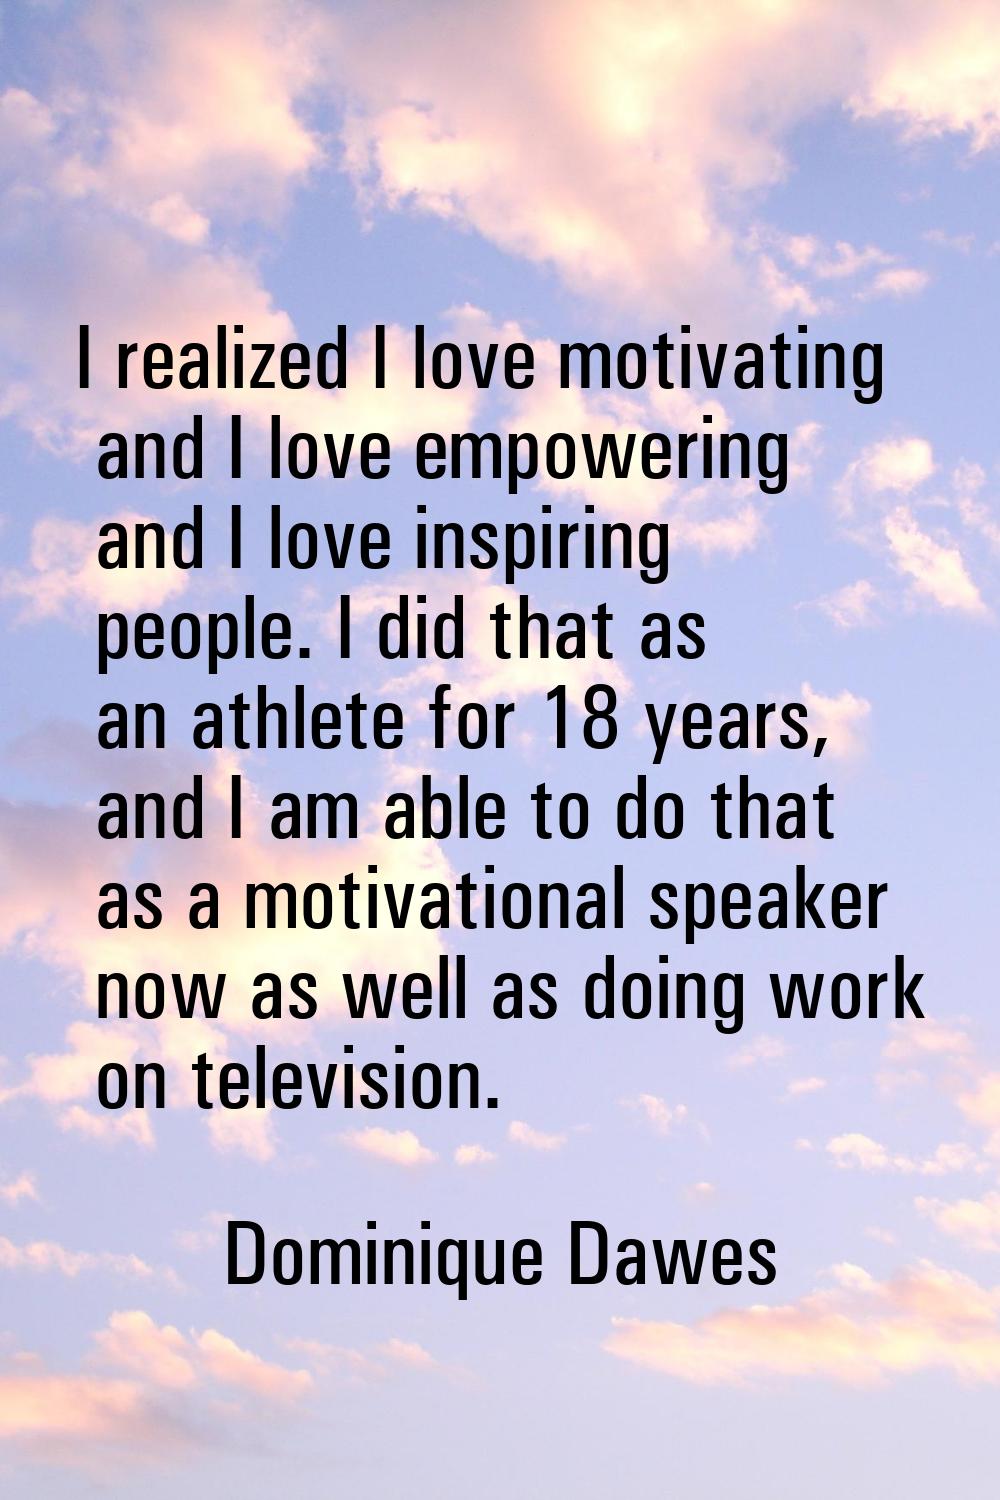 I realized I love motivating and I love empowering and I love inspiring people. I did that as an at